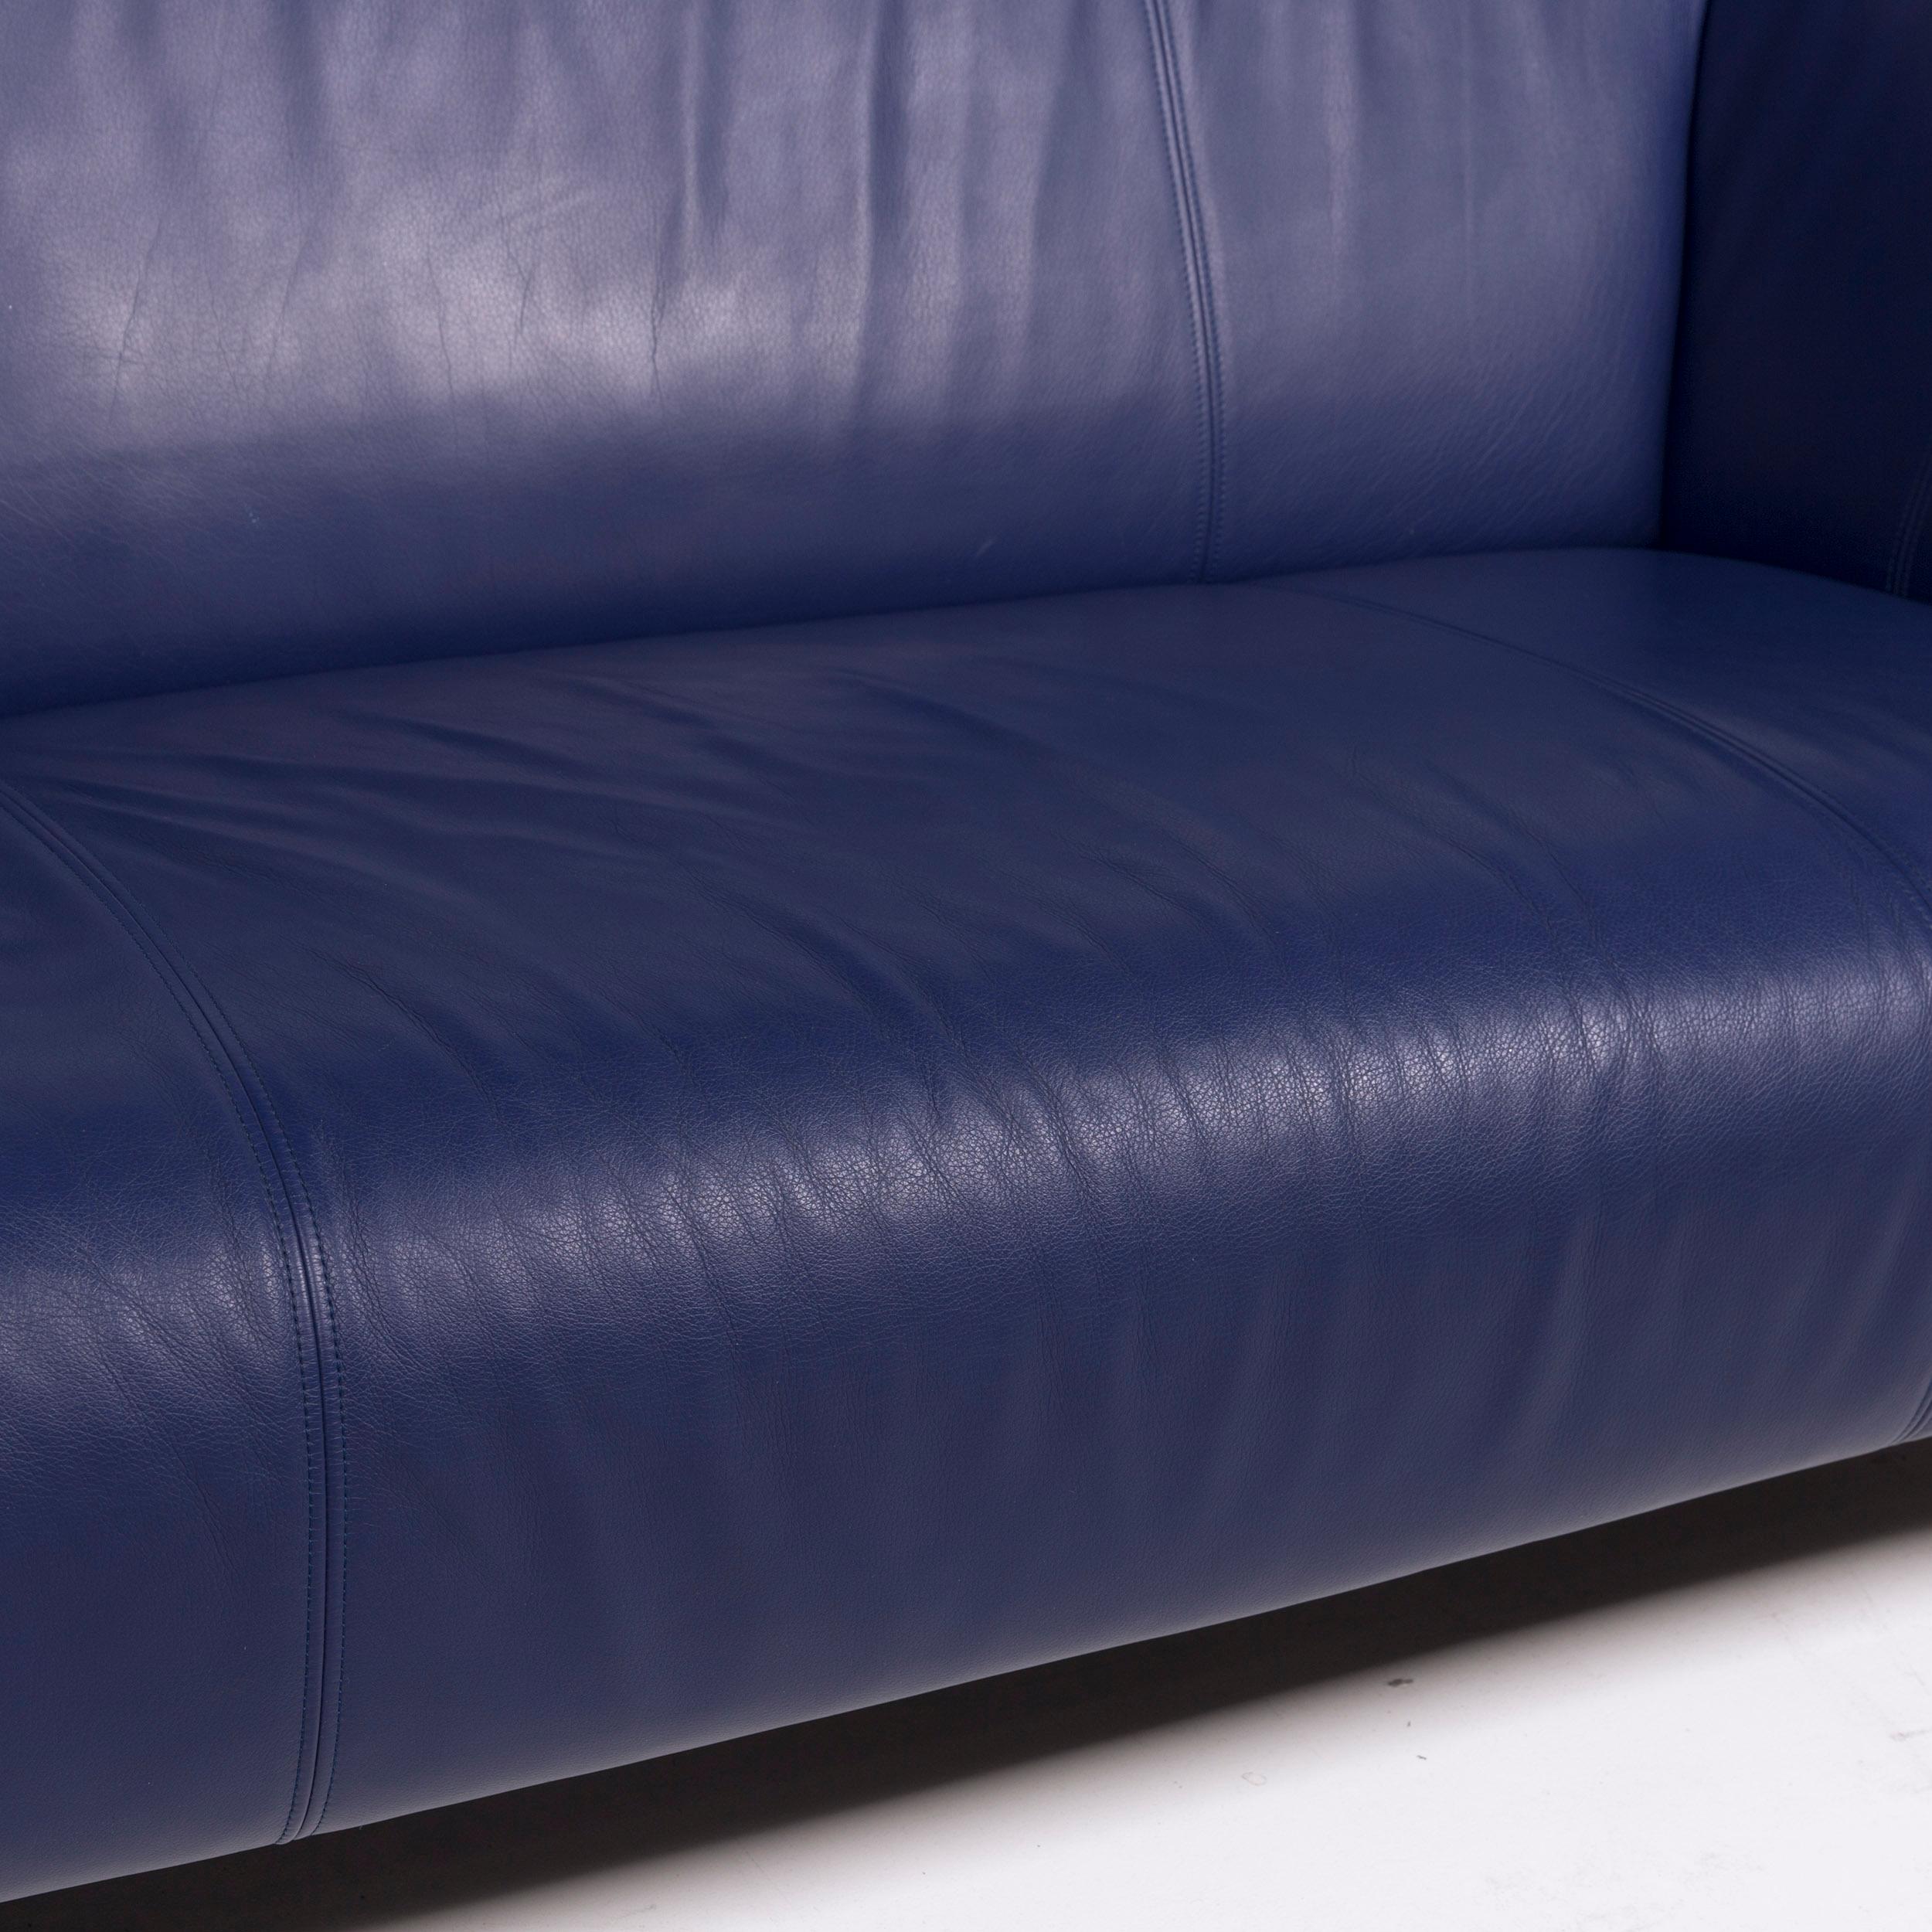 We bring to you a Rolf Benz 322 leather sofa blue two-seat couch.
 

 Product measurements in centimeters:
 

Depth 91
Width 189
Height 71
Seat-height 39
Rest-height 69
Seat-depth 59
Seat-width 124
Back-height 35.
  